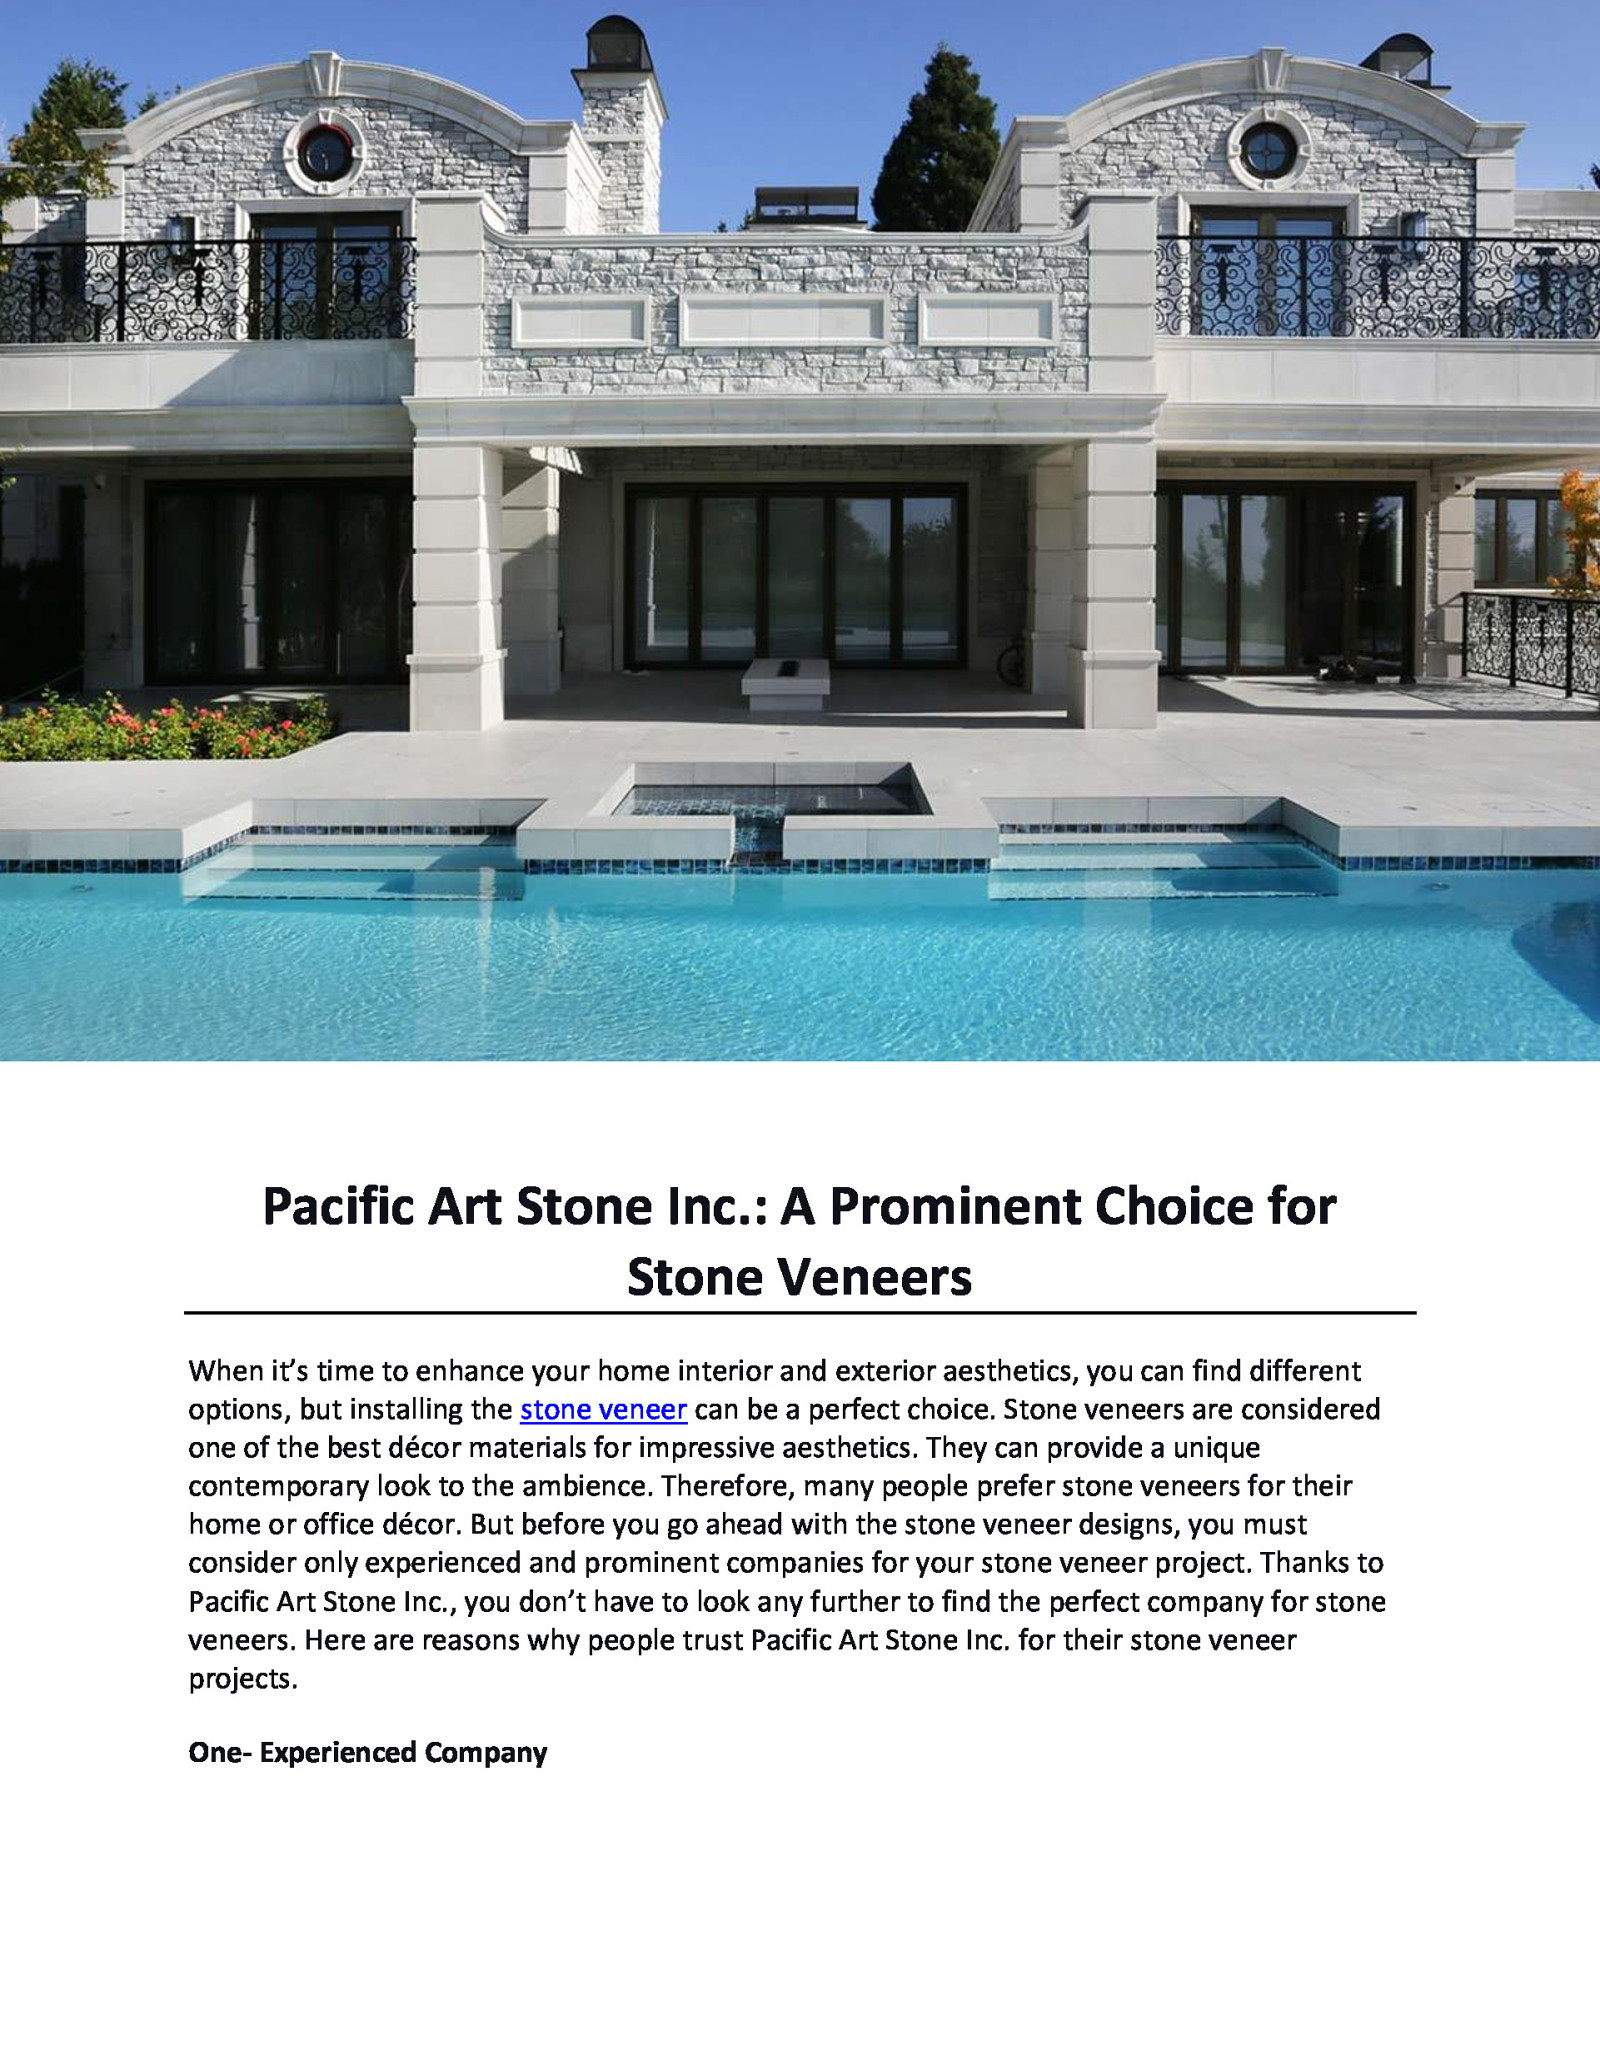 Pacific Art Stone Inc.: A Prominent Choice for Stone Veneers